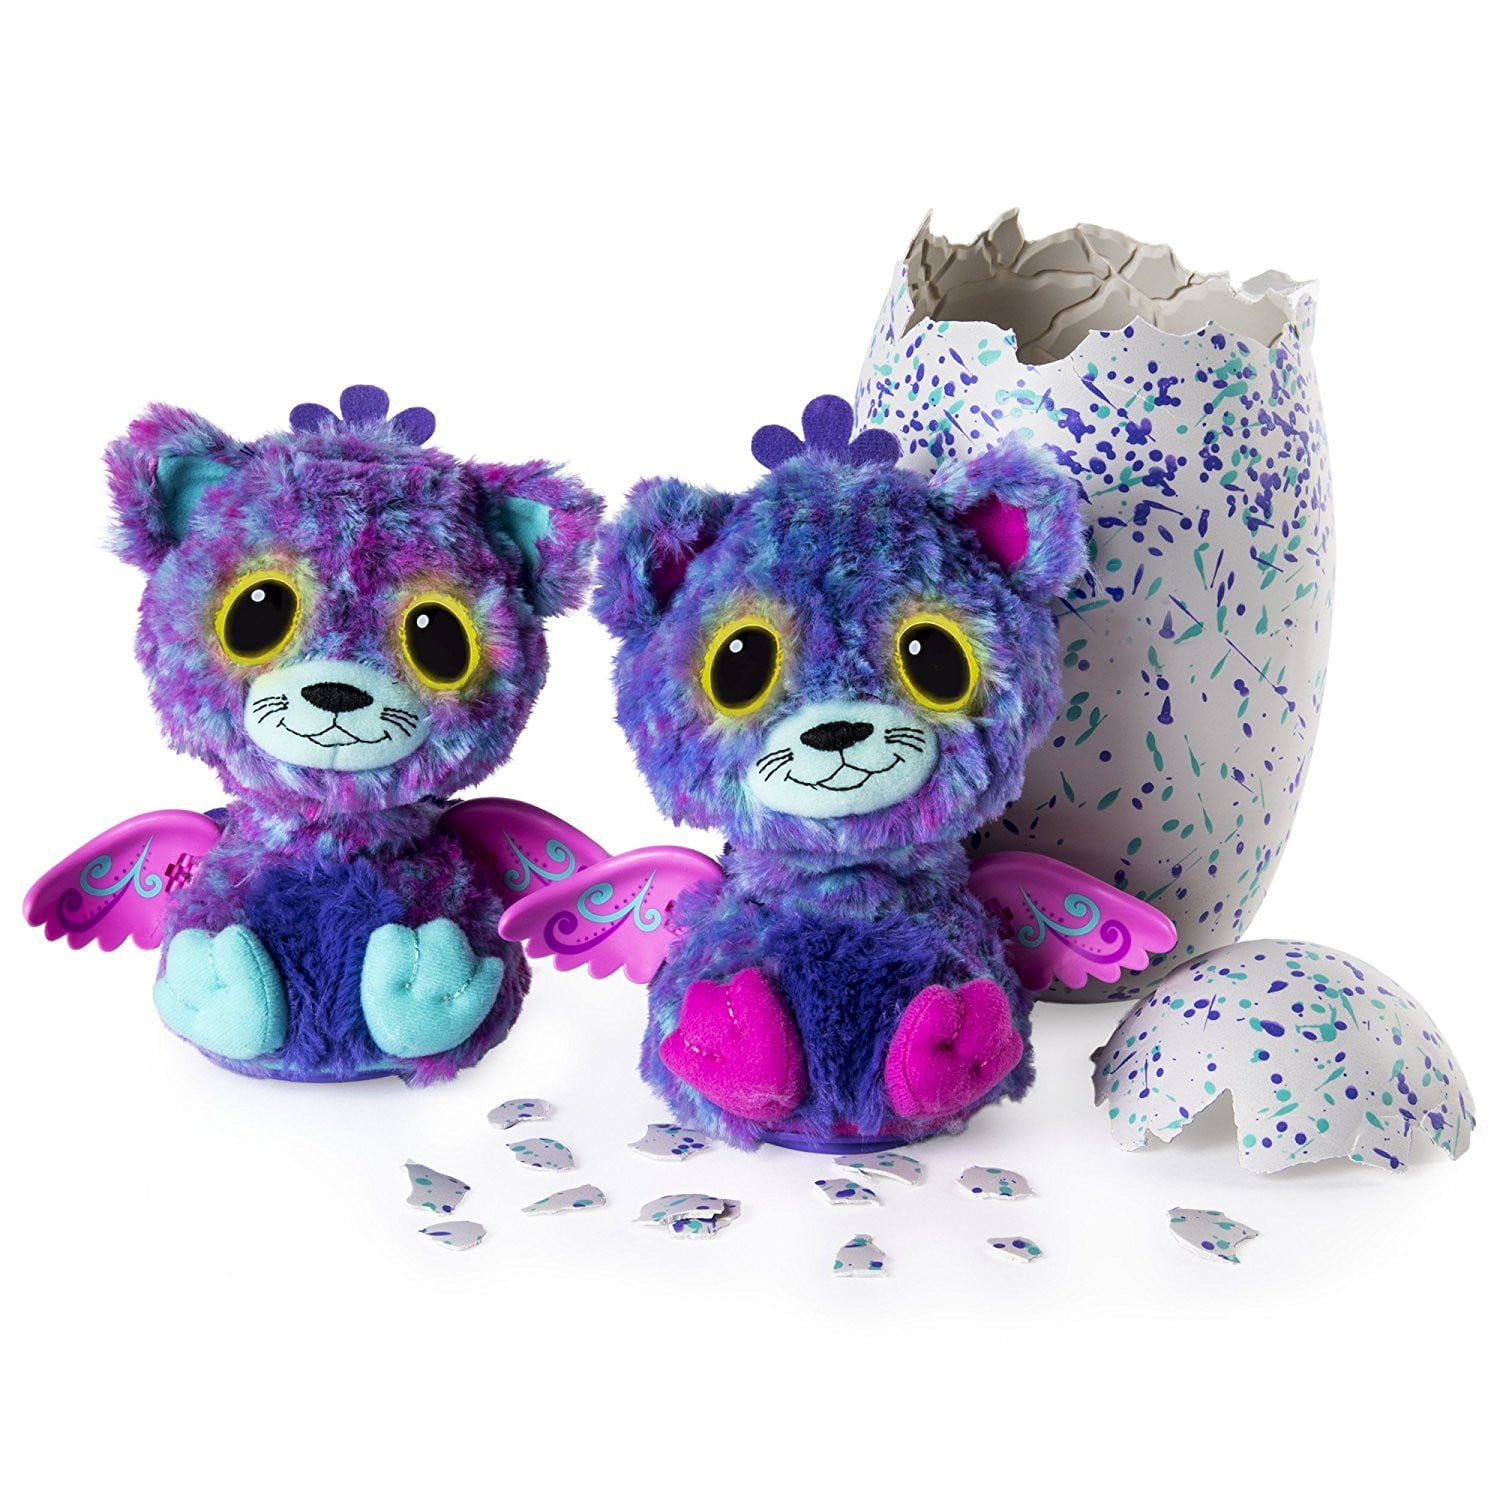 Tips to find a Hatchimal this holiday season